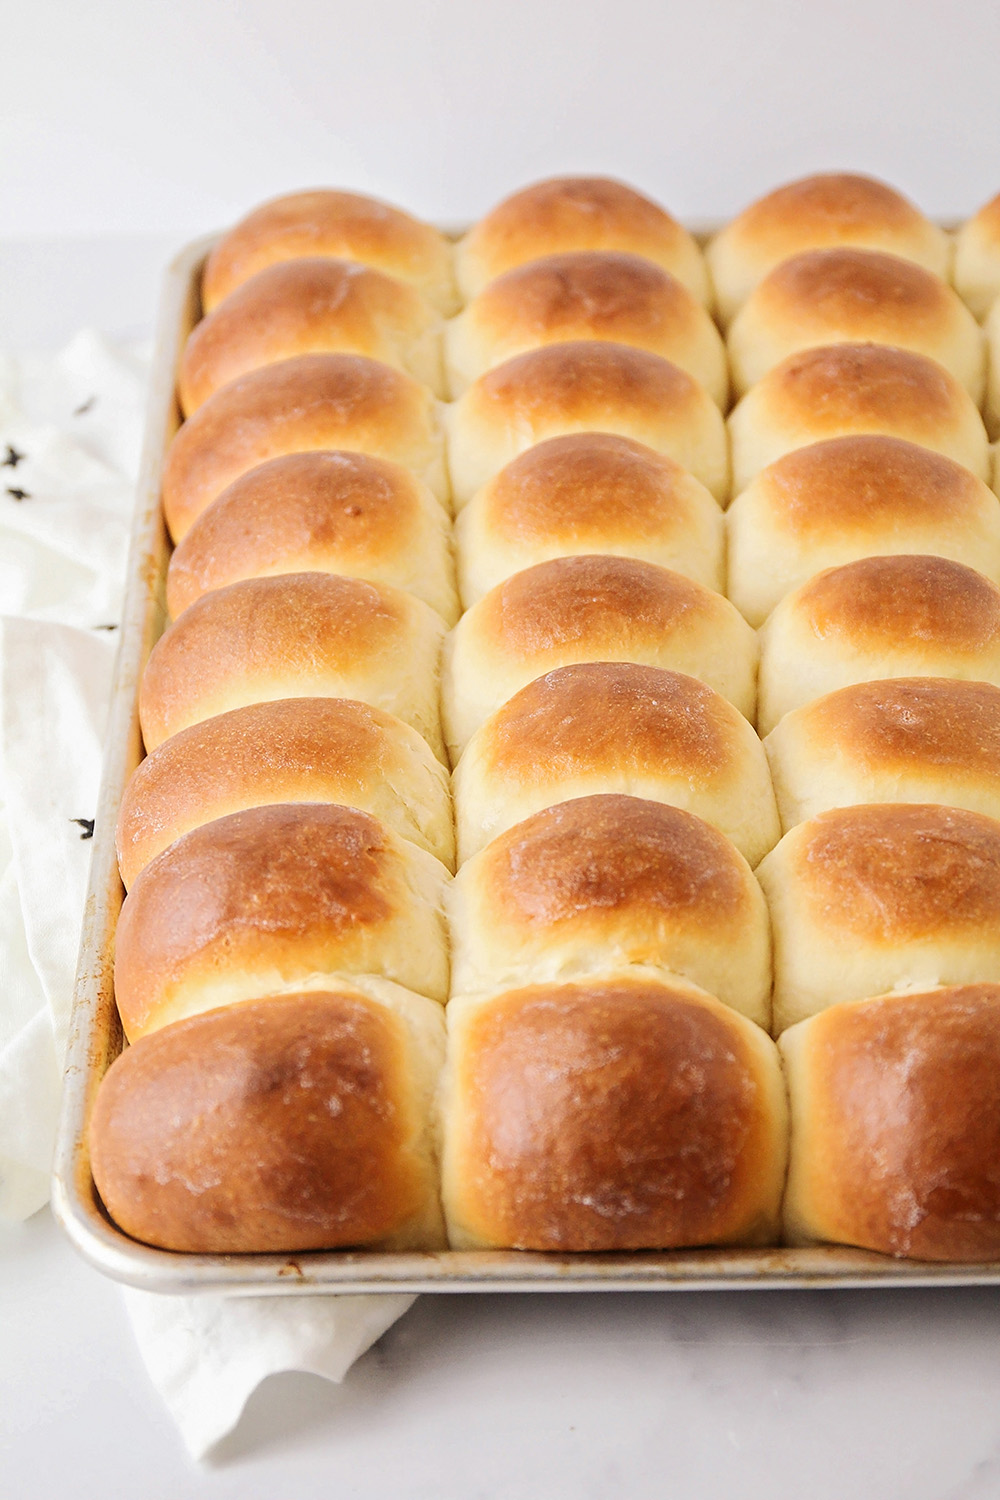 These light and soft pull-apart rolls are so delicious, and easy to make, too! They're the perfect dinner roll!